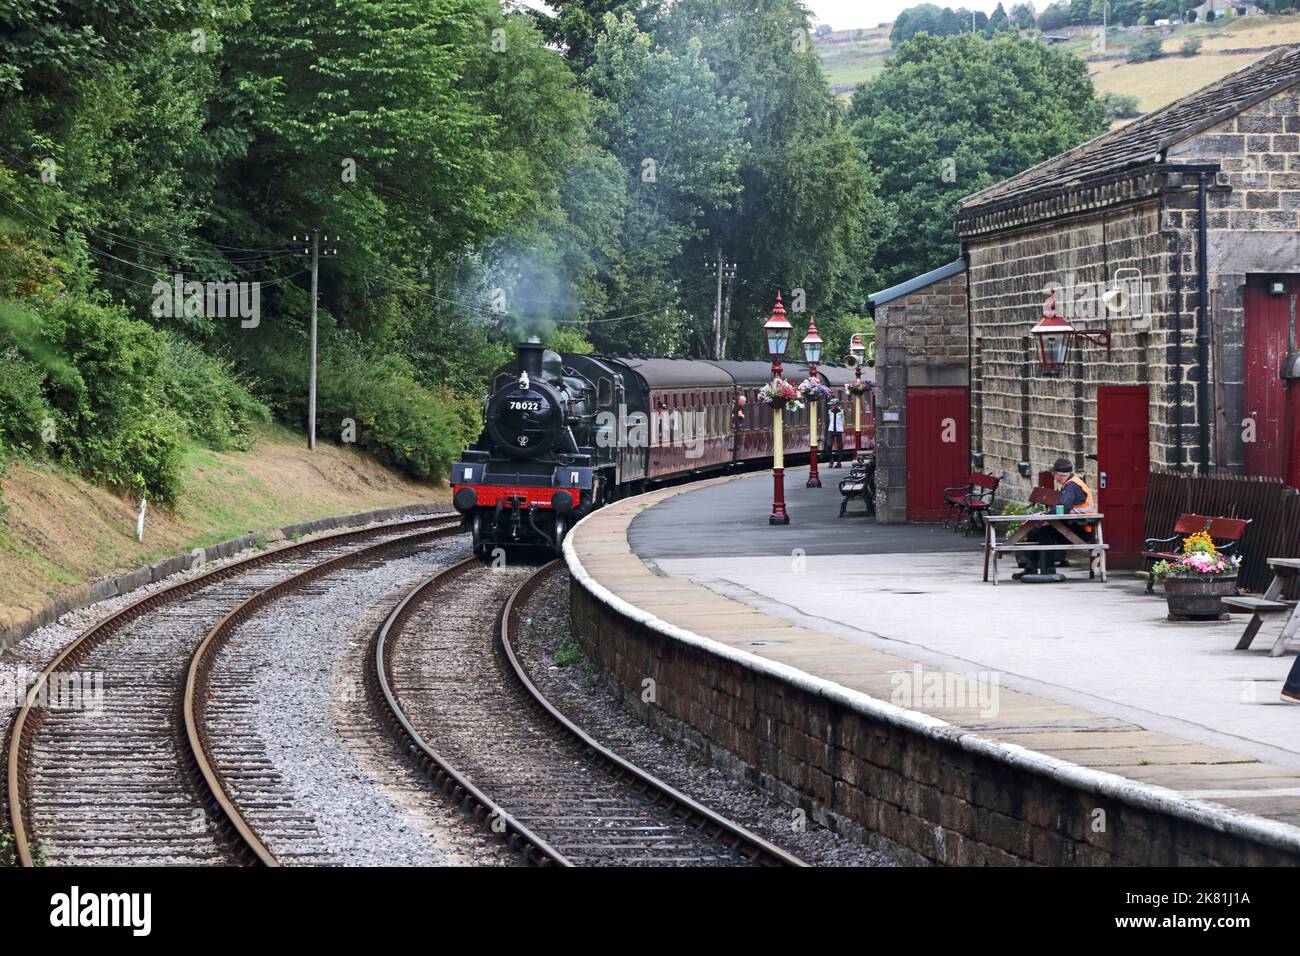 BR Standard Class 2MT 78022 steam train arriving at Oxenhope station on Keighley & Worth Valley Railway Stock Photo